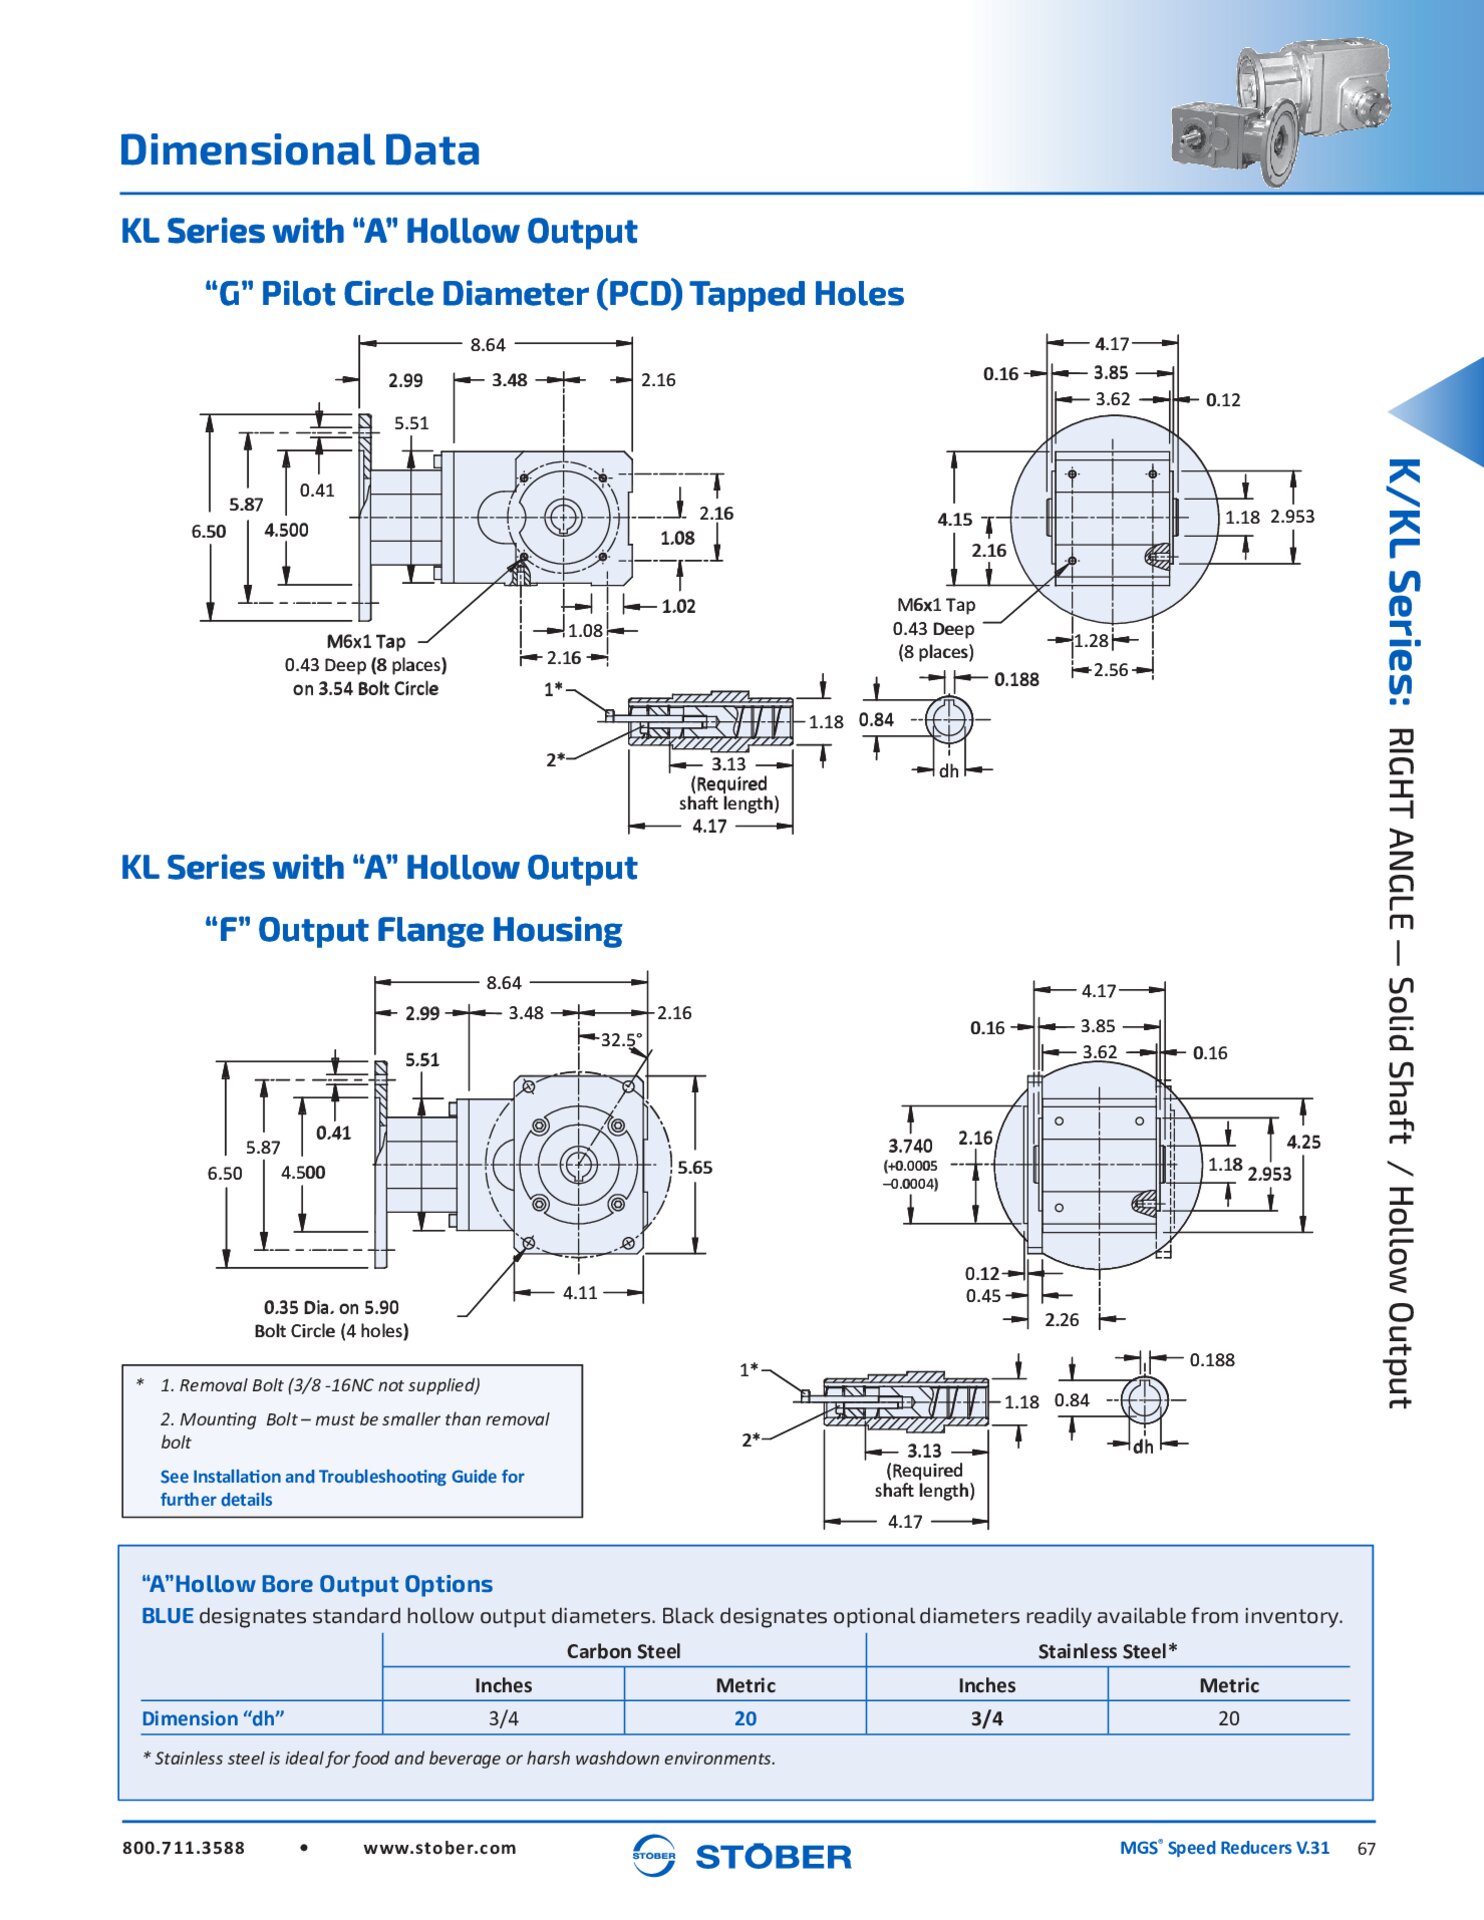 MGS Speed Reducers K Dimensions